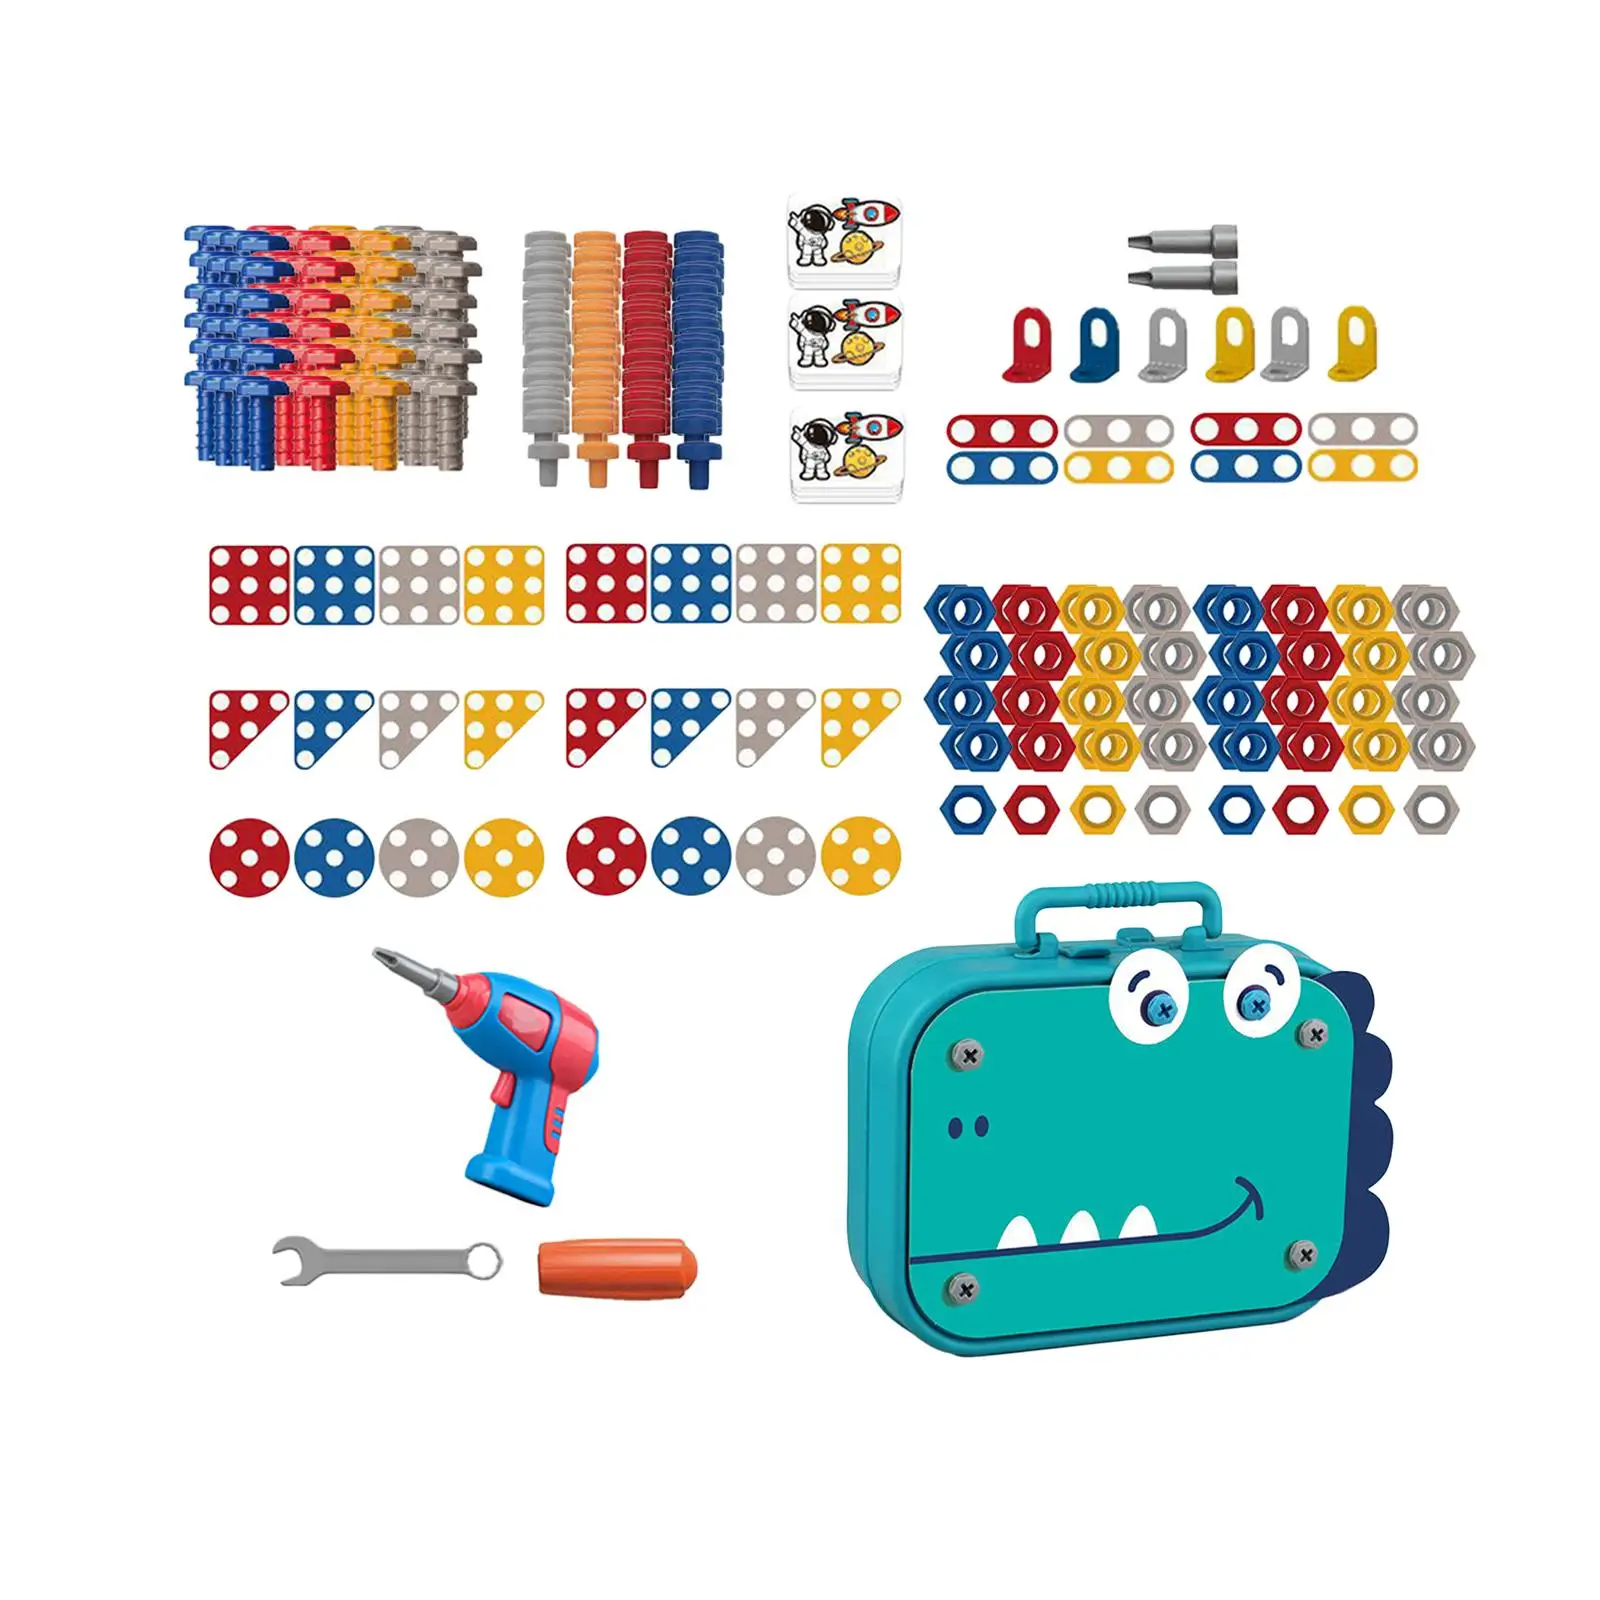 Drill and Screwdriver Toy Set Shapes Matching DIY Kids Nut and Bolts Toy Birthday Gift Problem Solving Coordination Imagination